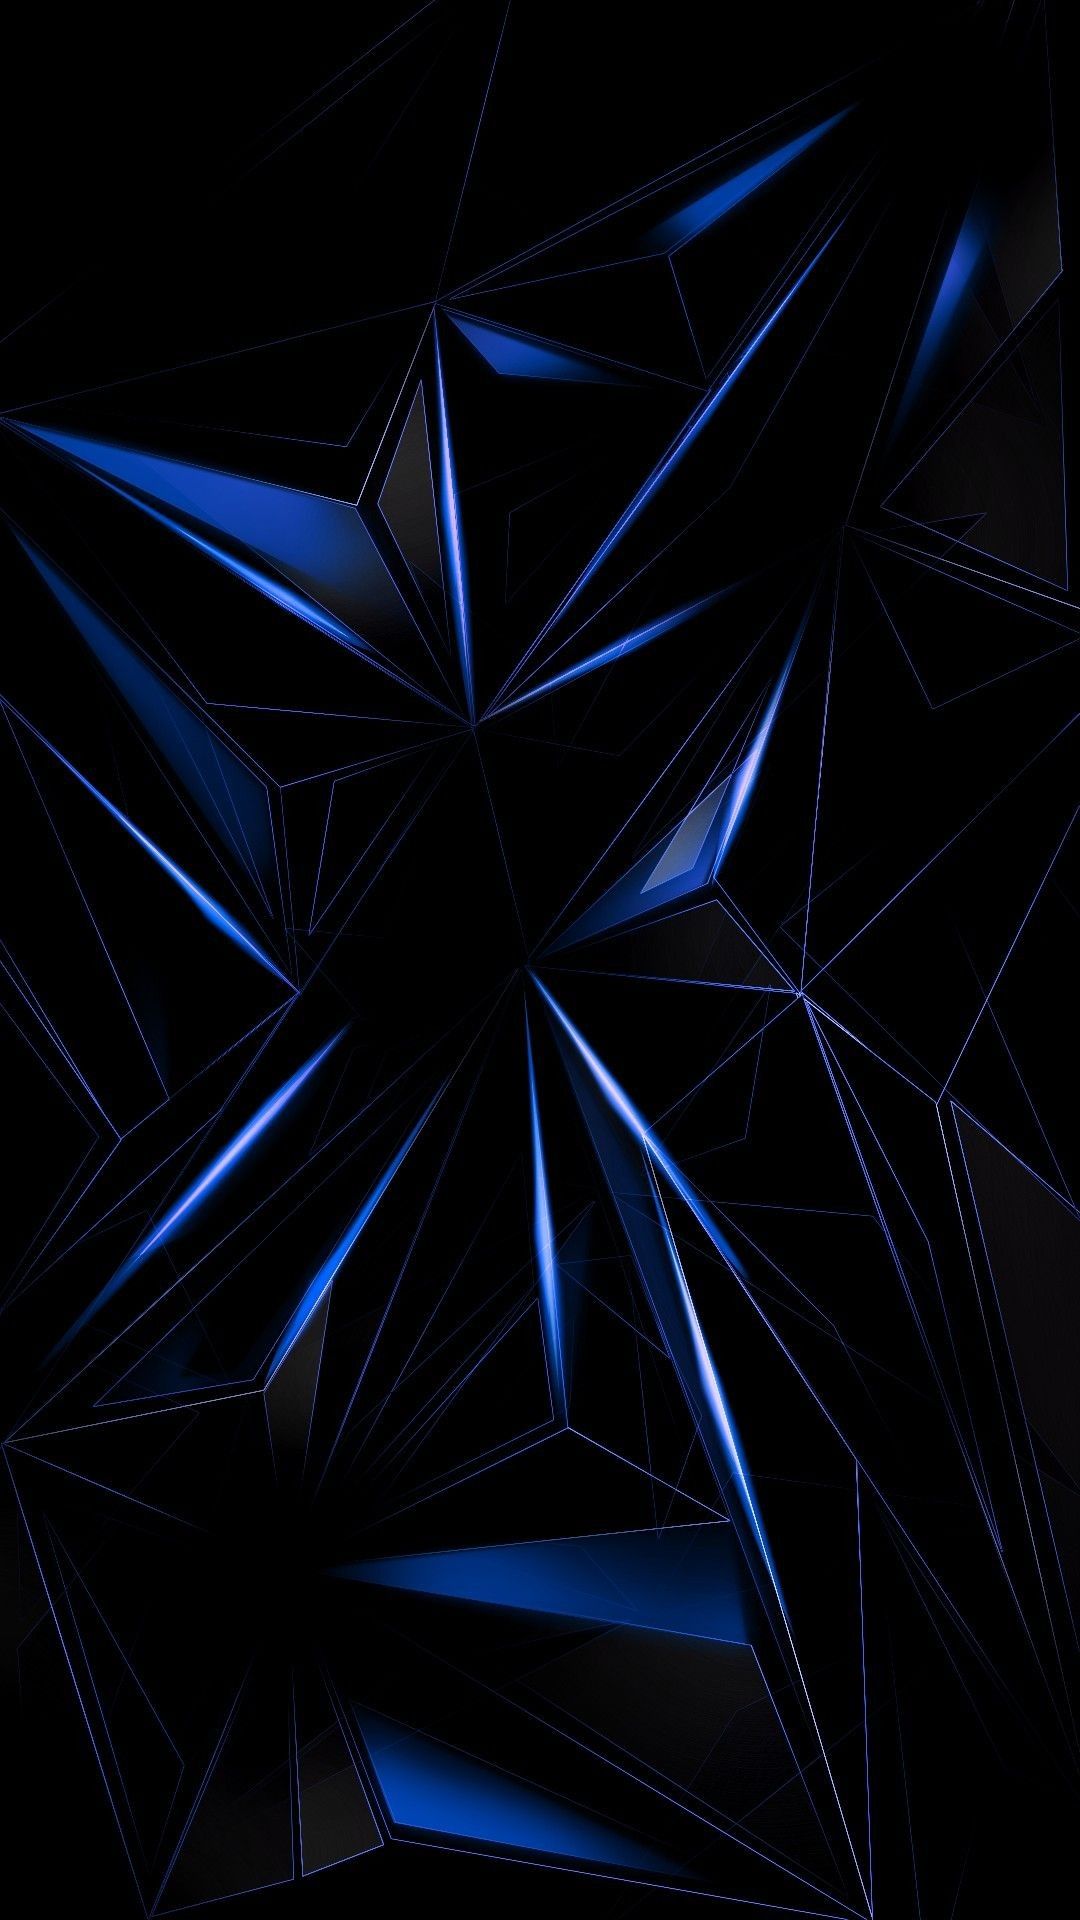 Abstract Blue Black Wallpaper Mobile On High Quality Wallpaper on firefoxwallpaper.com. Abstract wallpaper background, Abstract iphone wallpaper, Navy wallpaper